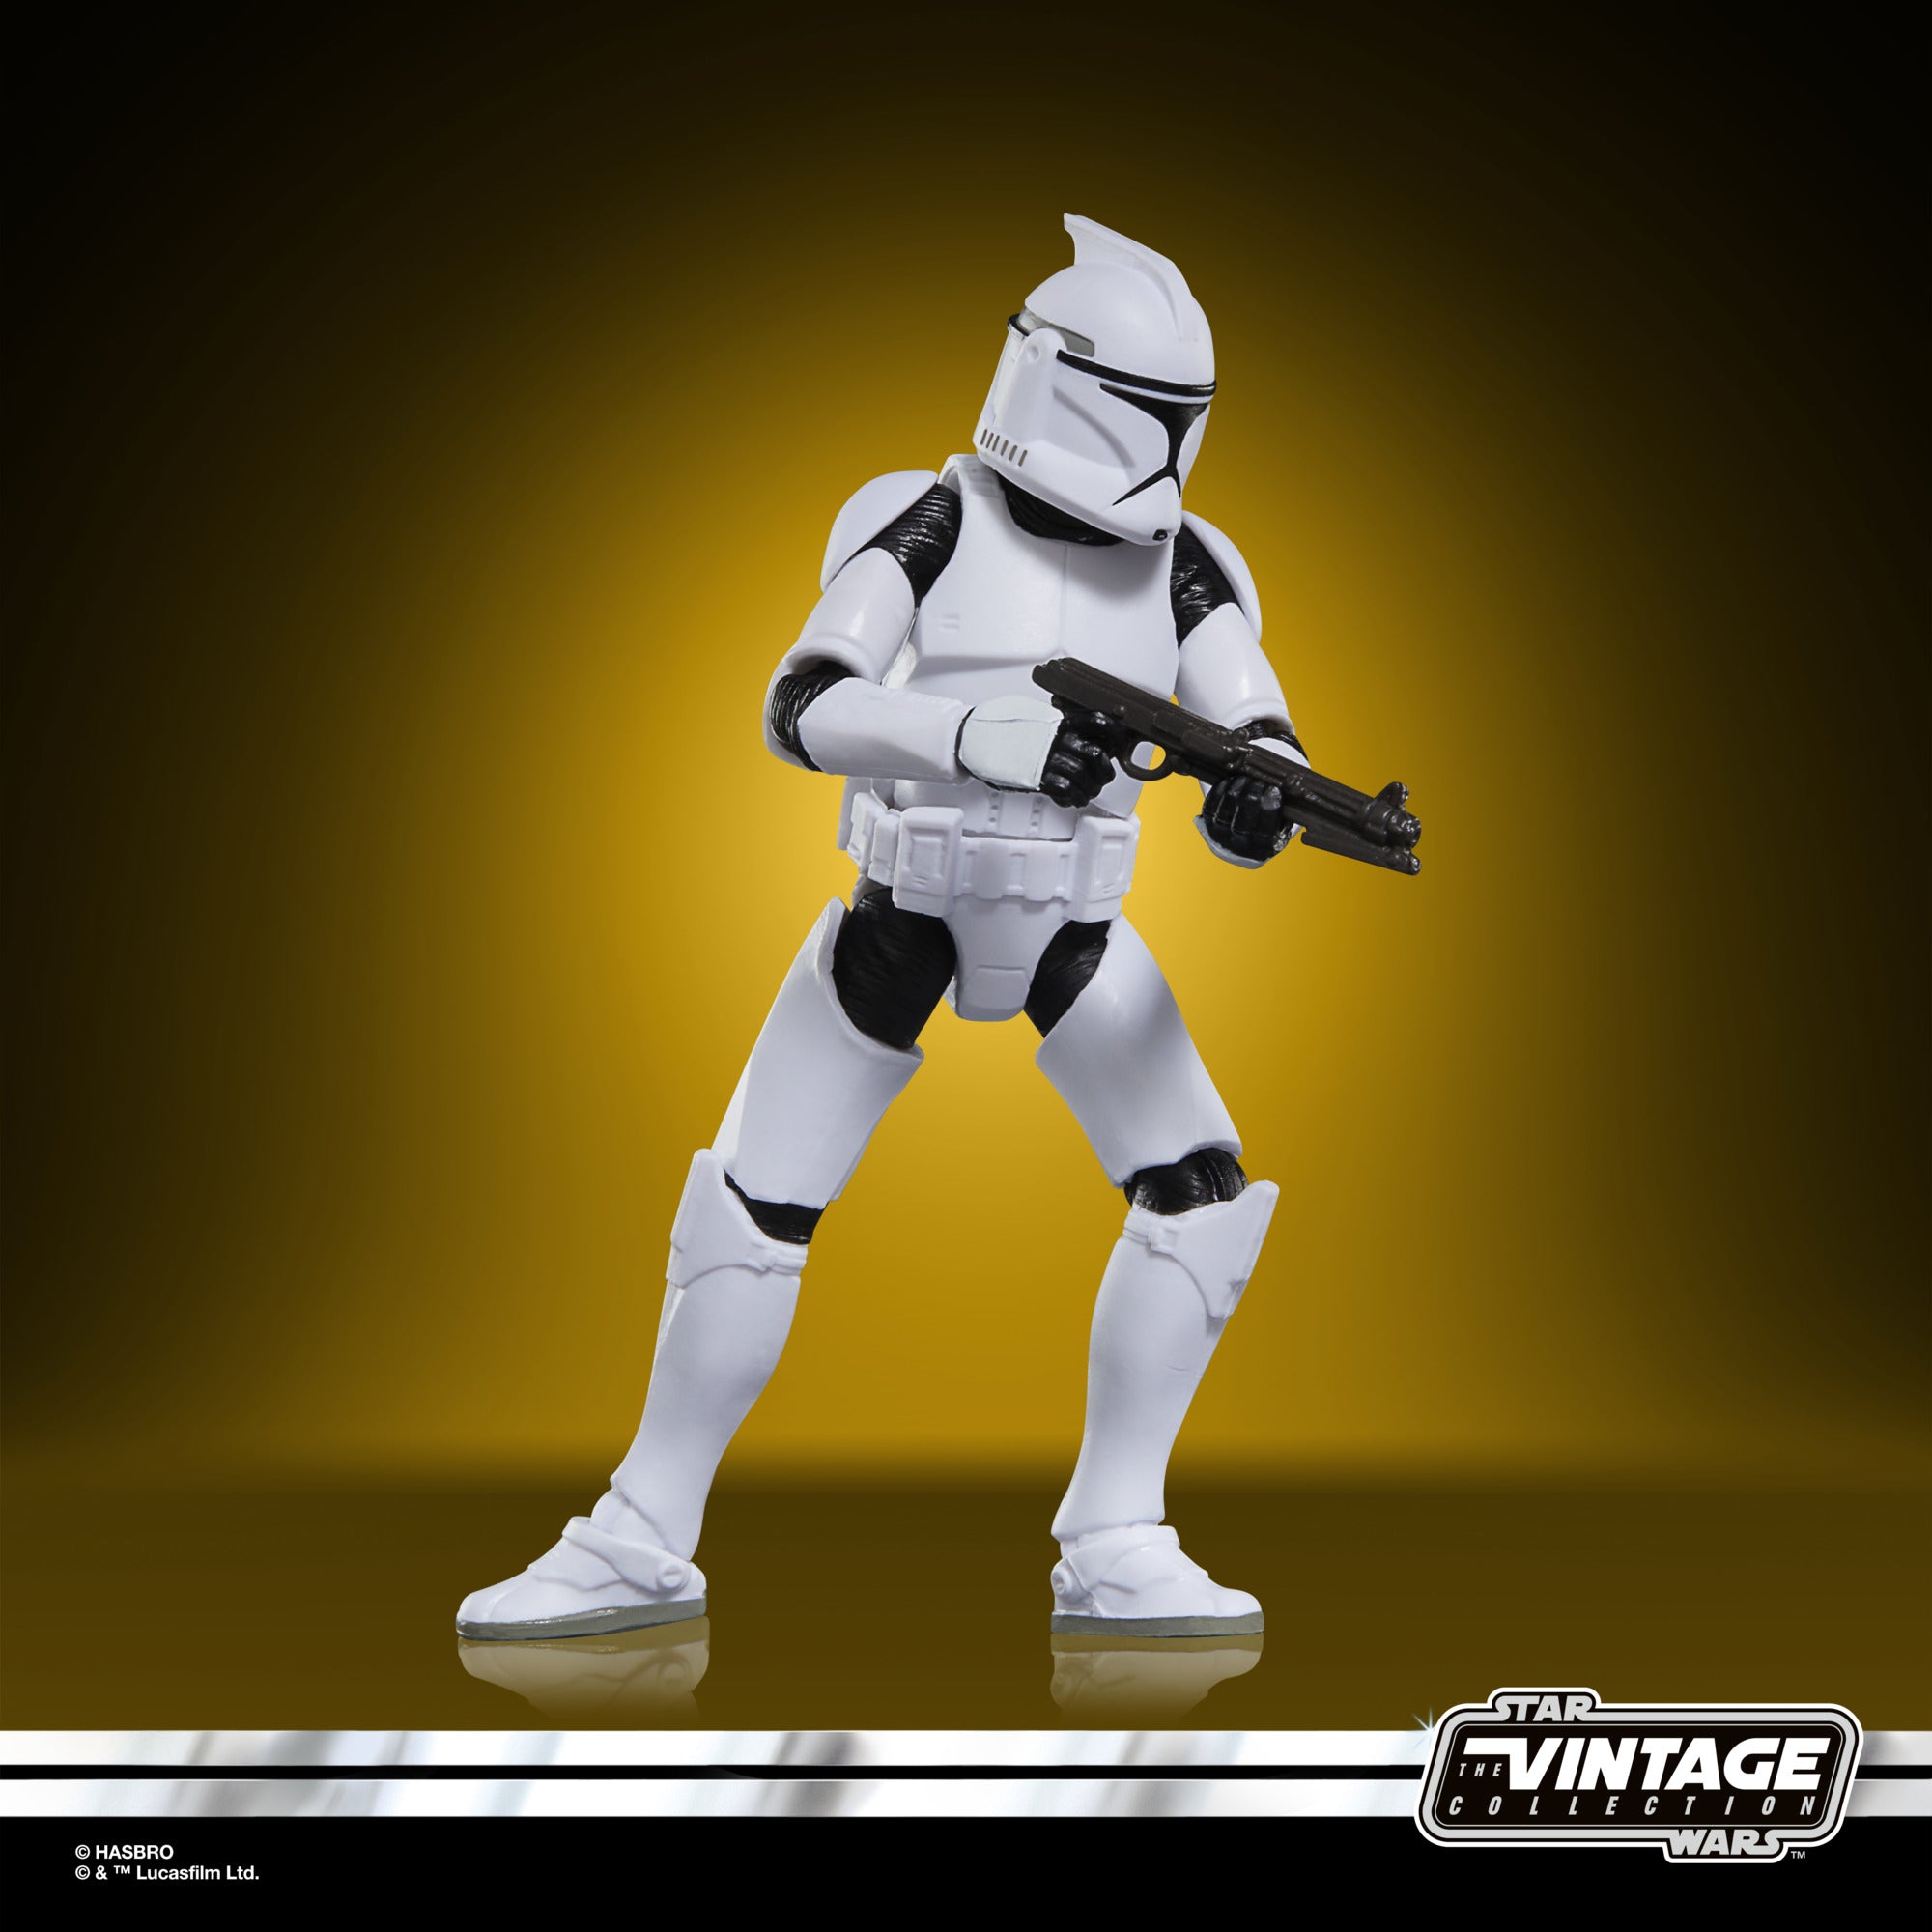 Star Wars The Vintage Collection: Attack Of The Clones - Clone Trooper Fase 1